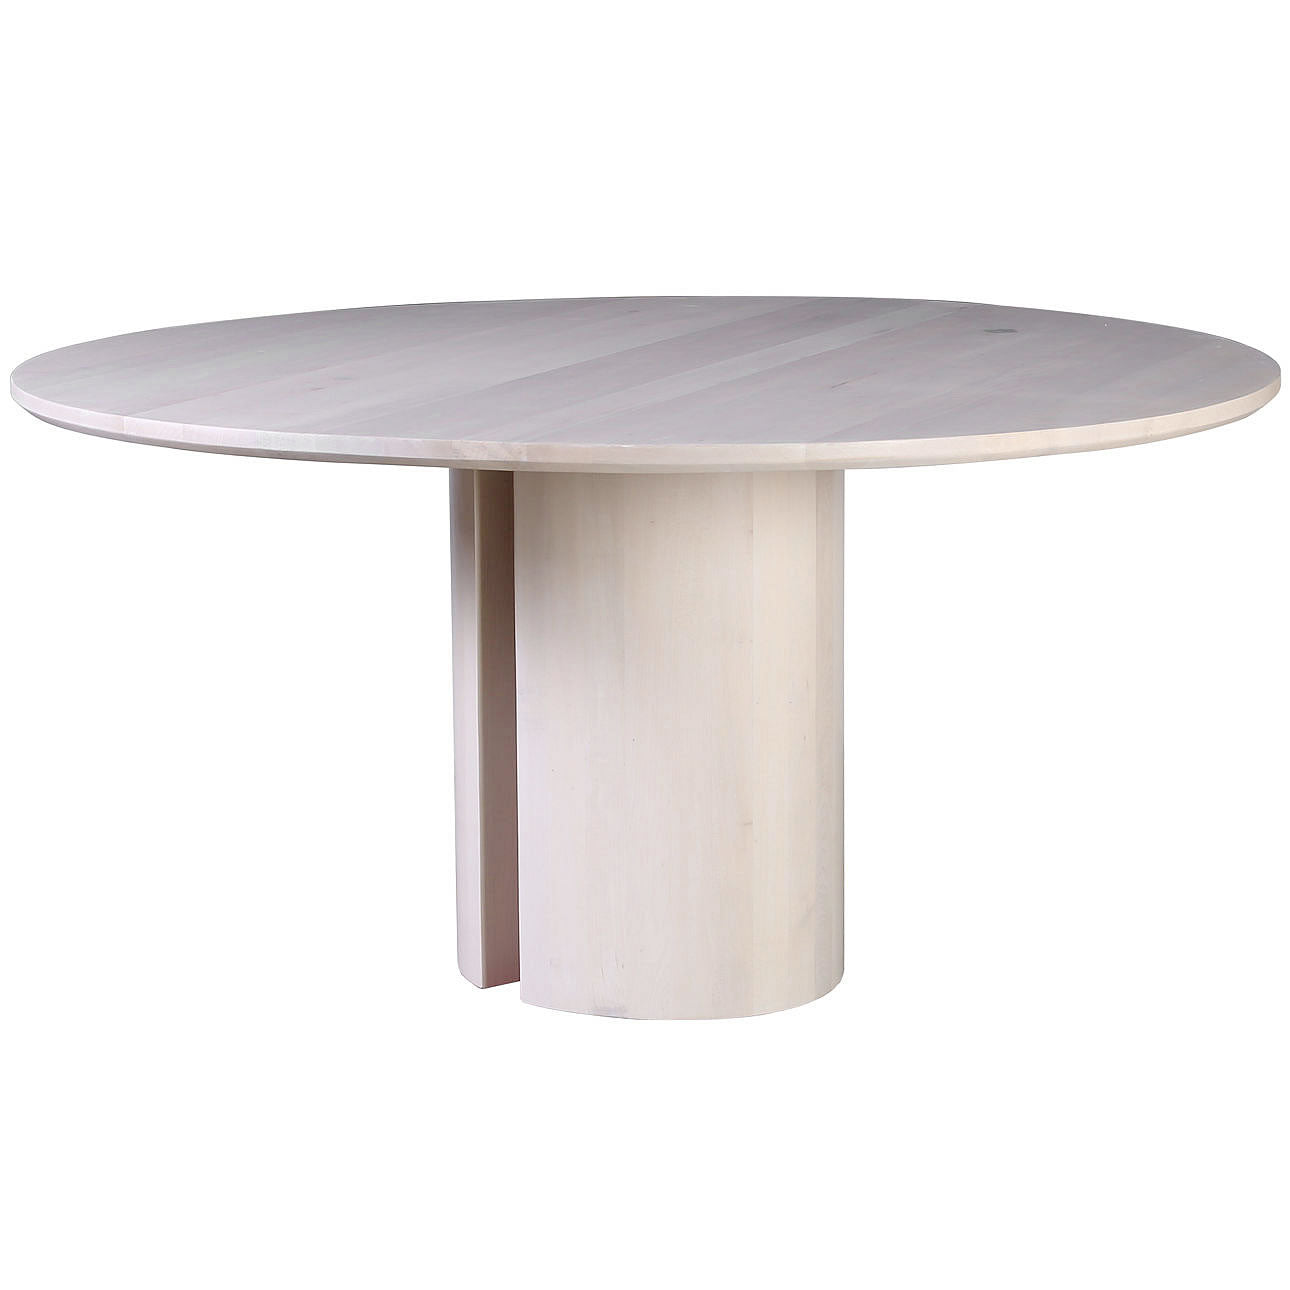 lightweight-concrete-marble-pedestal-dining-table